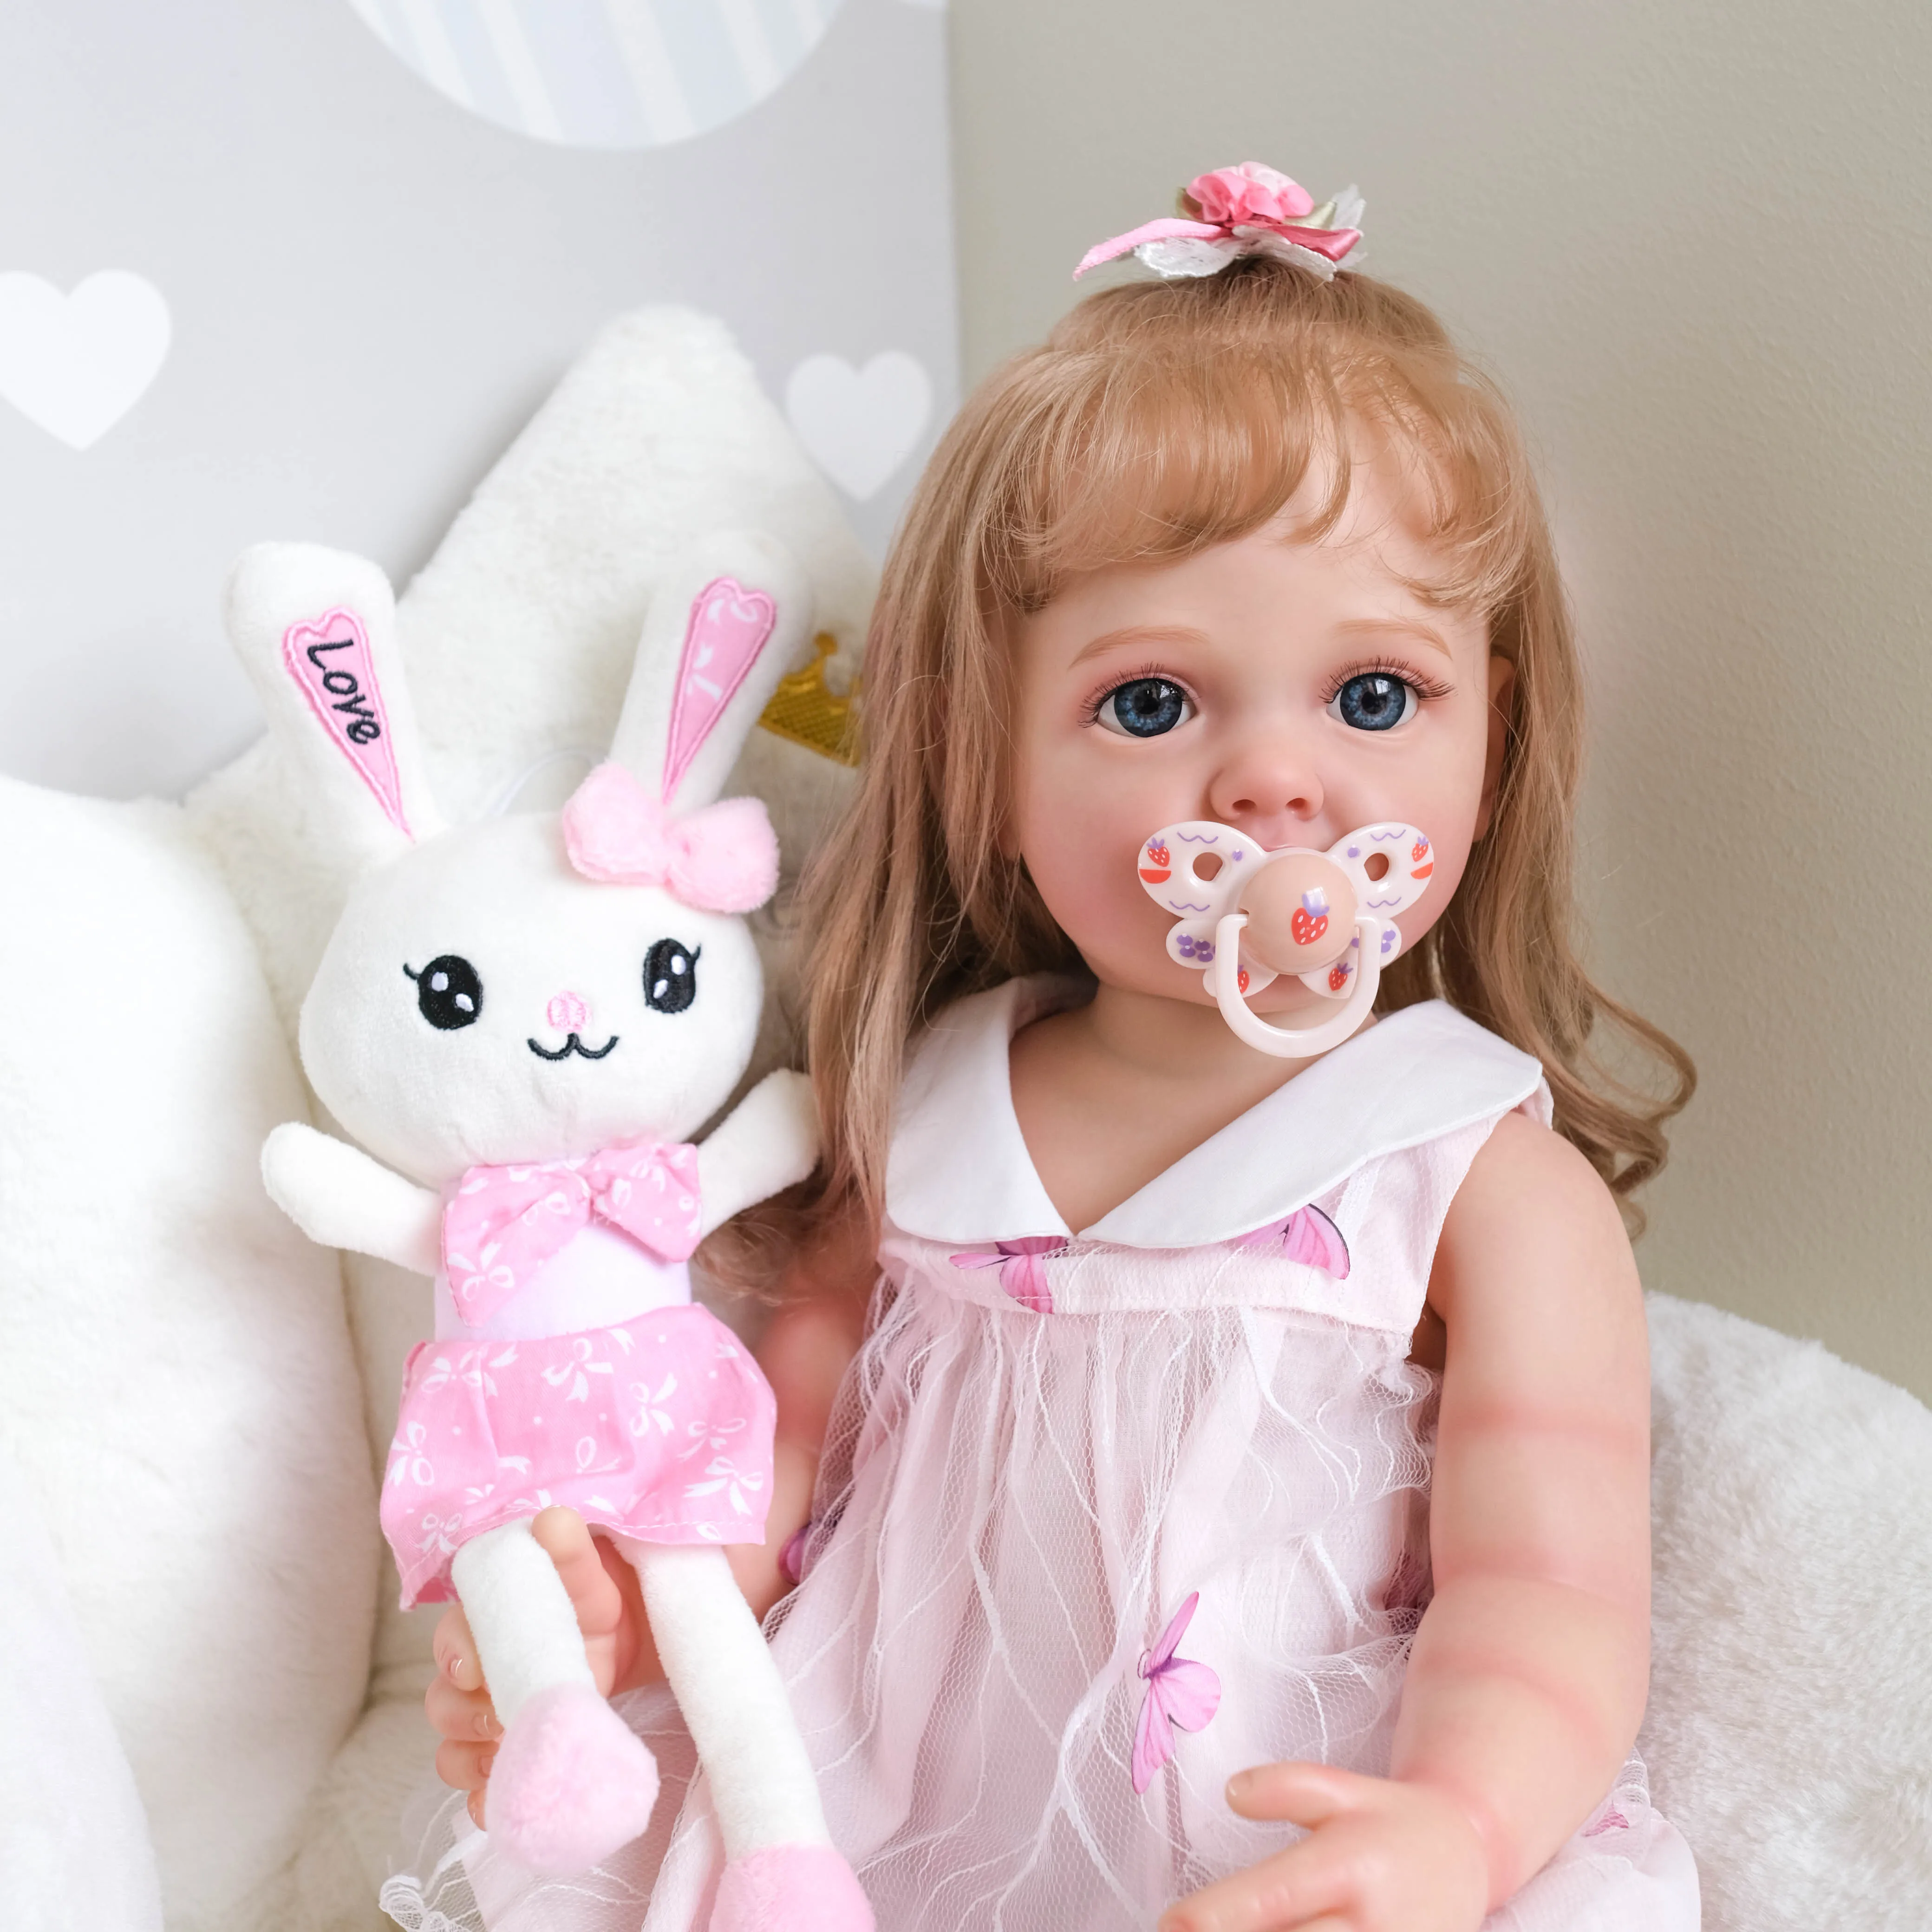 

ALIVE BEBE 55CM Full Body Silicone Reborn Princeess Betty Toddler Girl Toy Lifelike Handmade 3D Skin Painting with Visible Veins